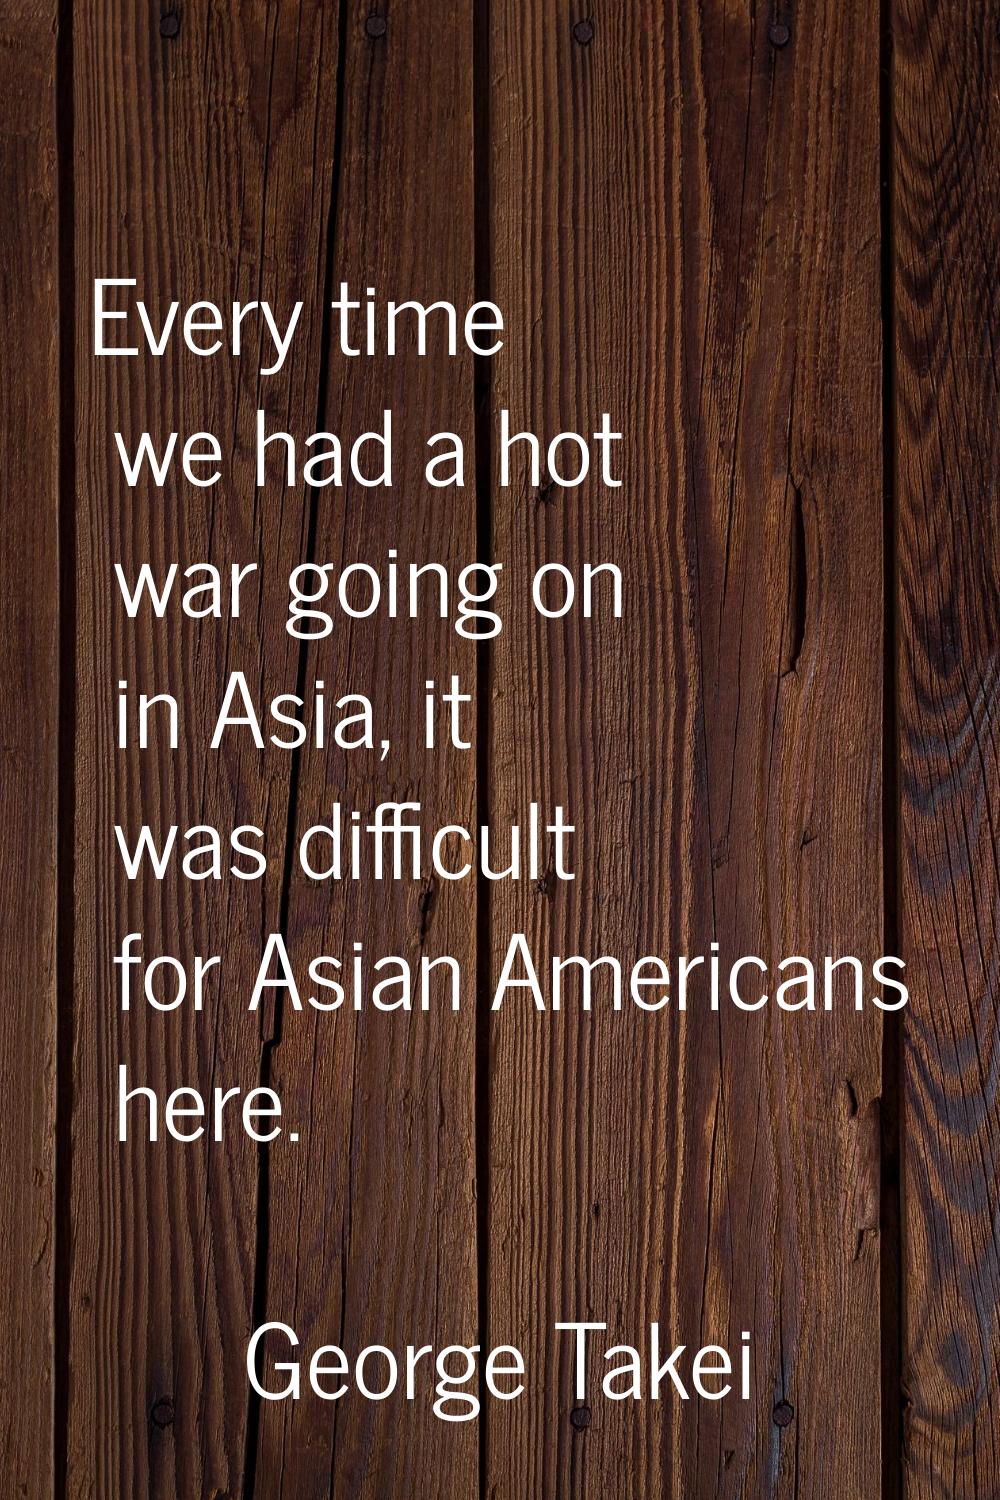 Every time we had a hot war going on in Asia, it was difficult for Asian Americans here.